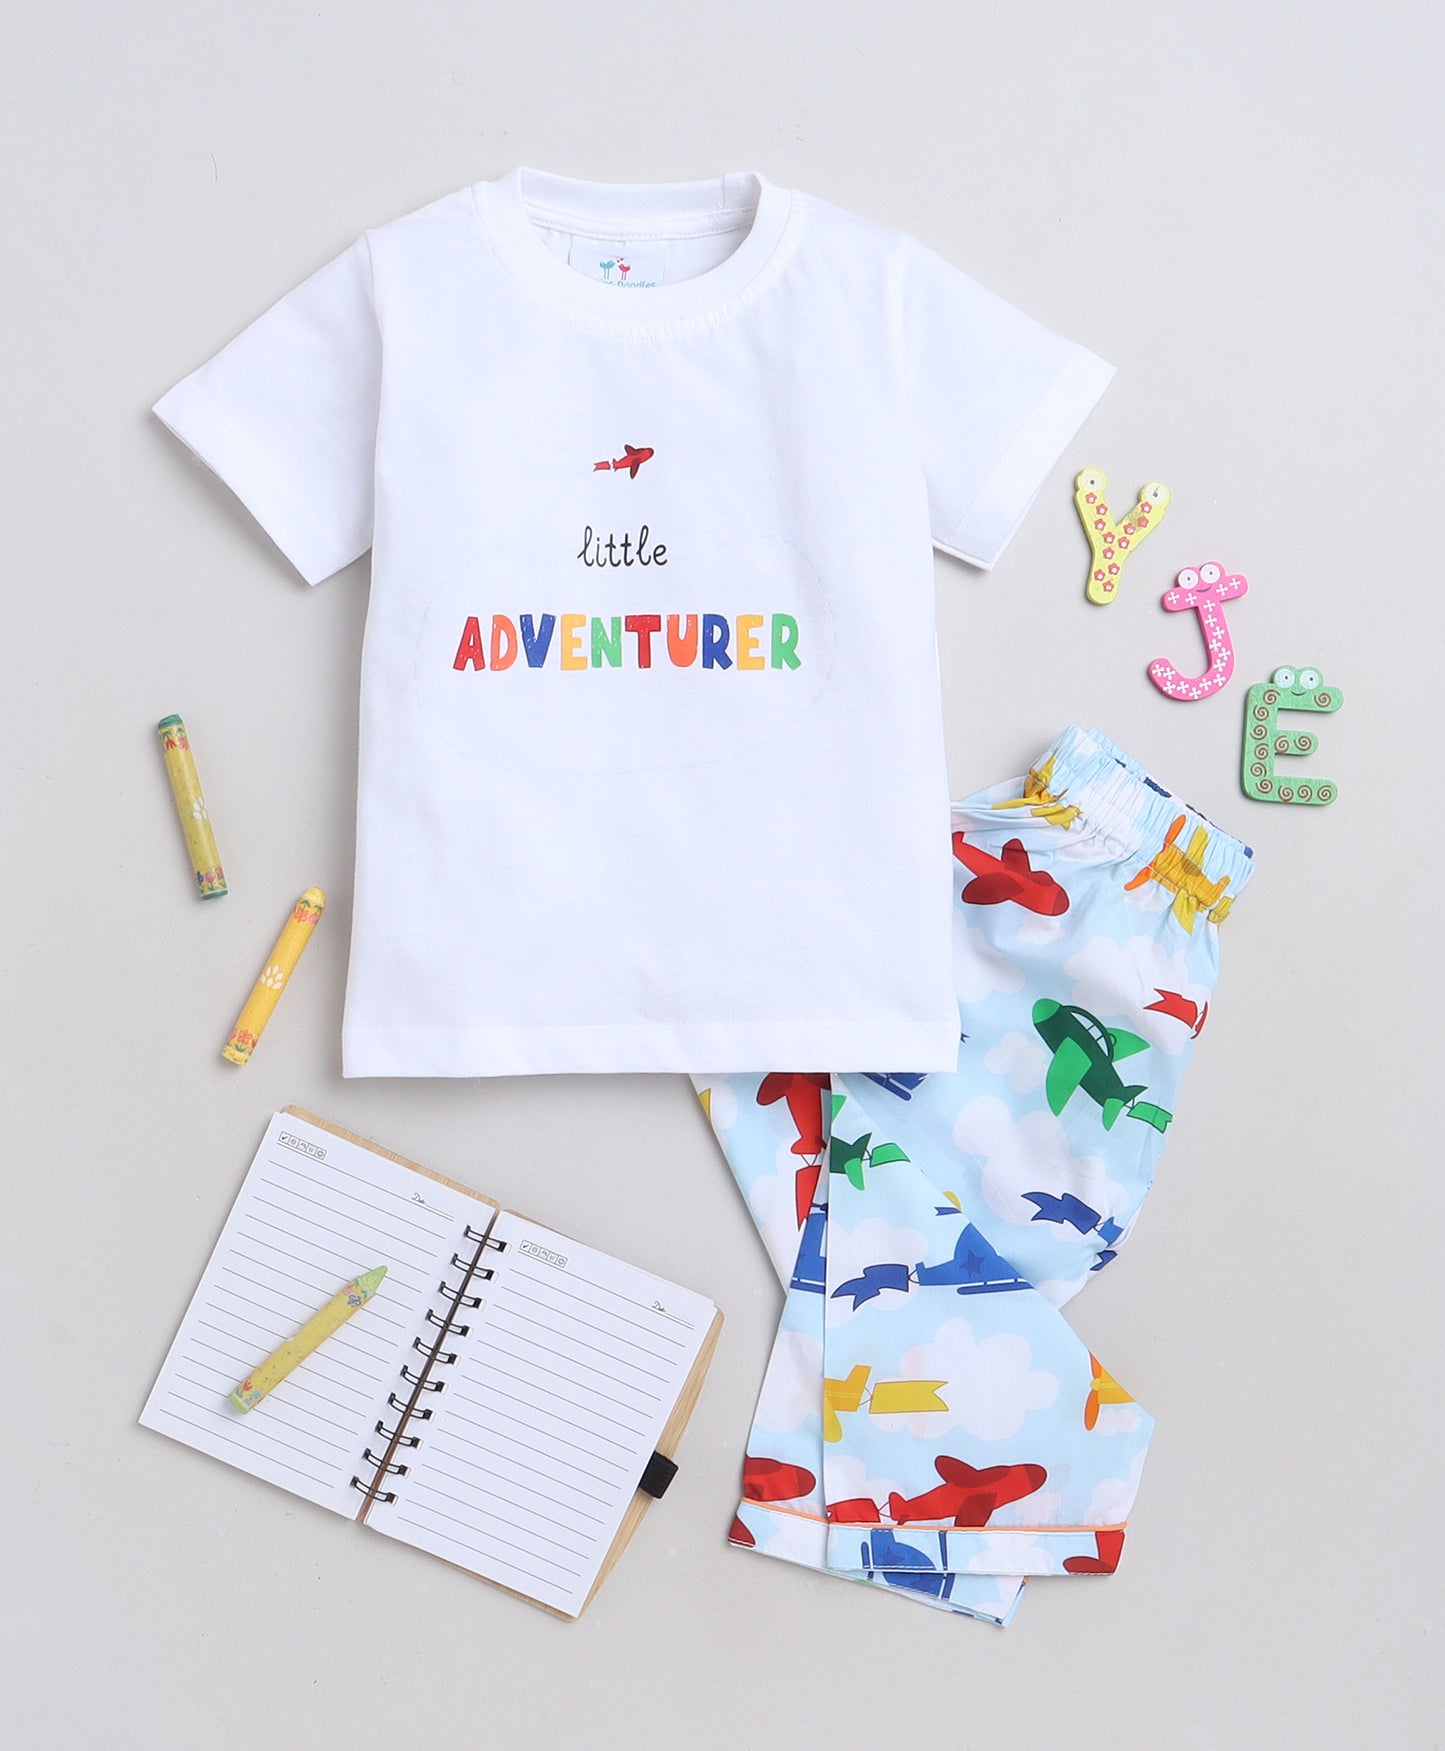 Knitting Doodles Premium Cotton Kids' Night suit with Aeroplane print t-shirt and Pyjama- Blue and White